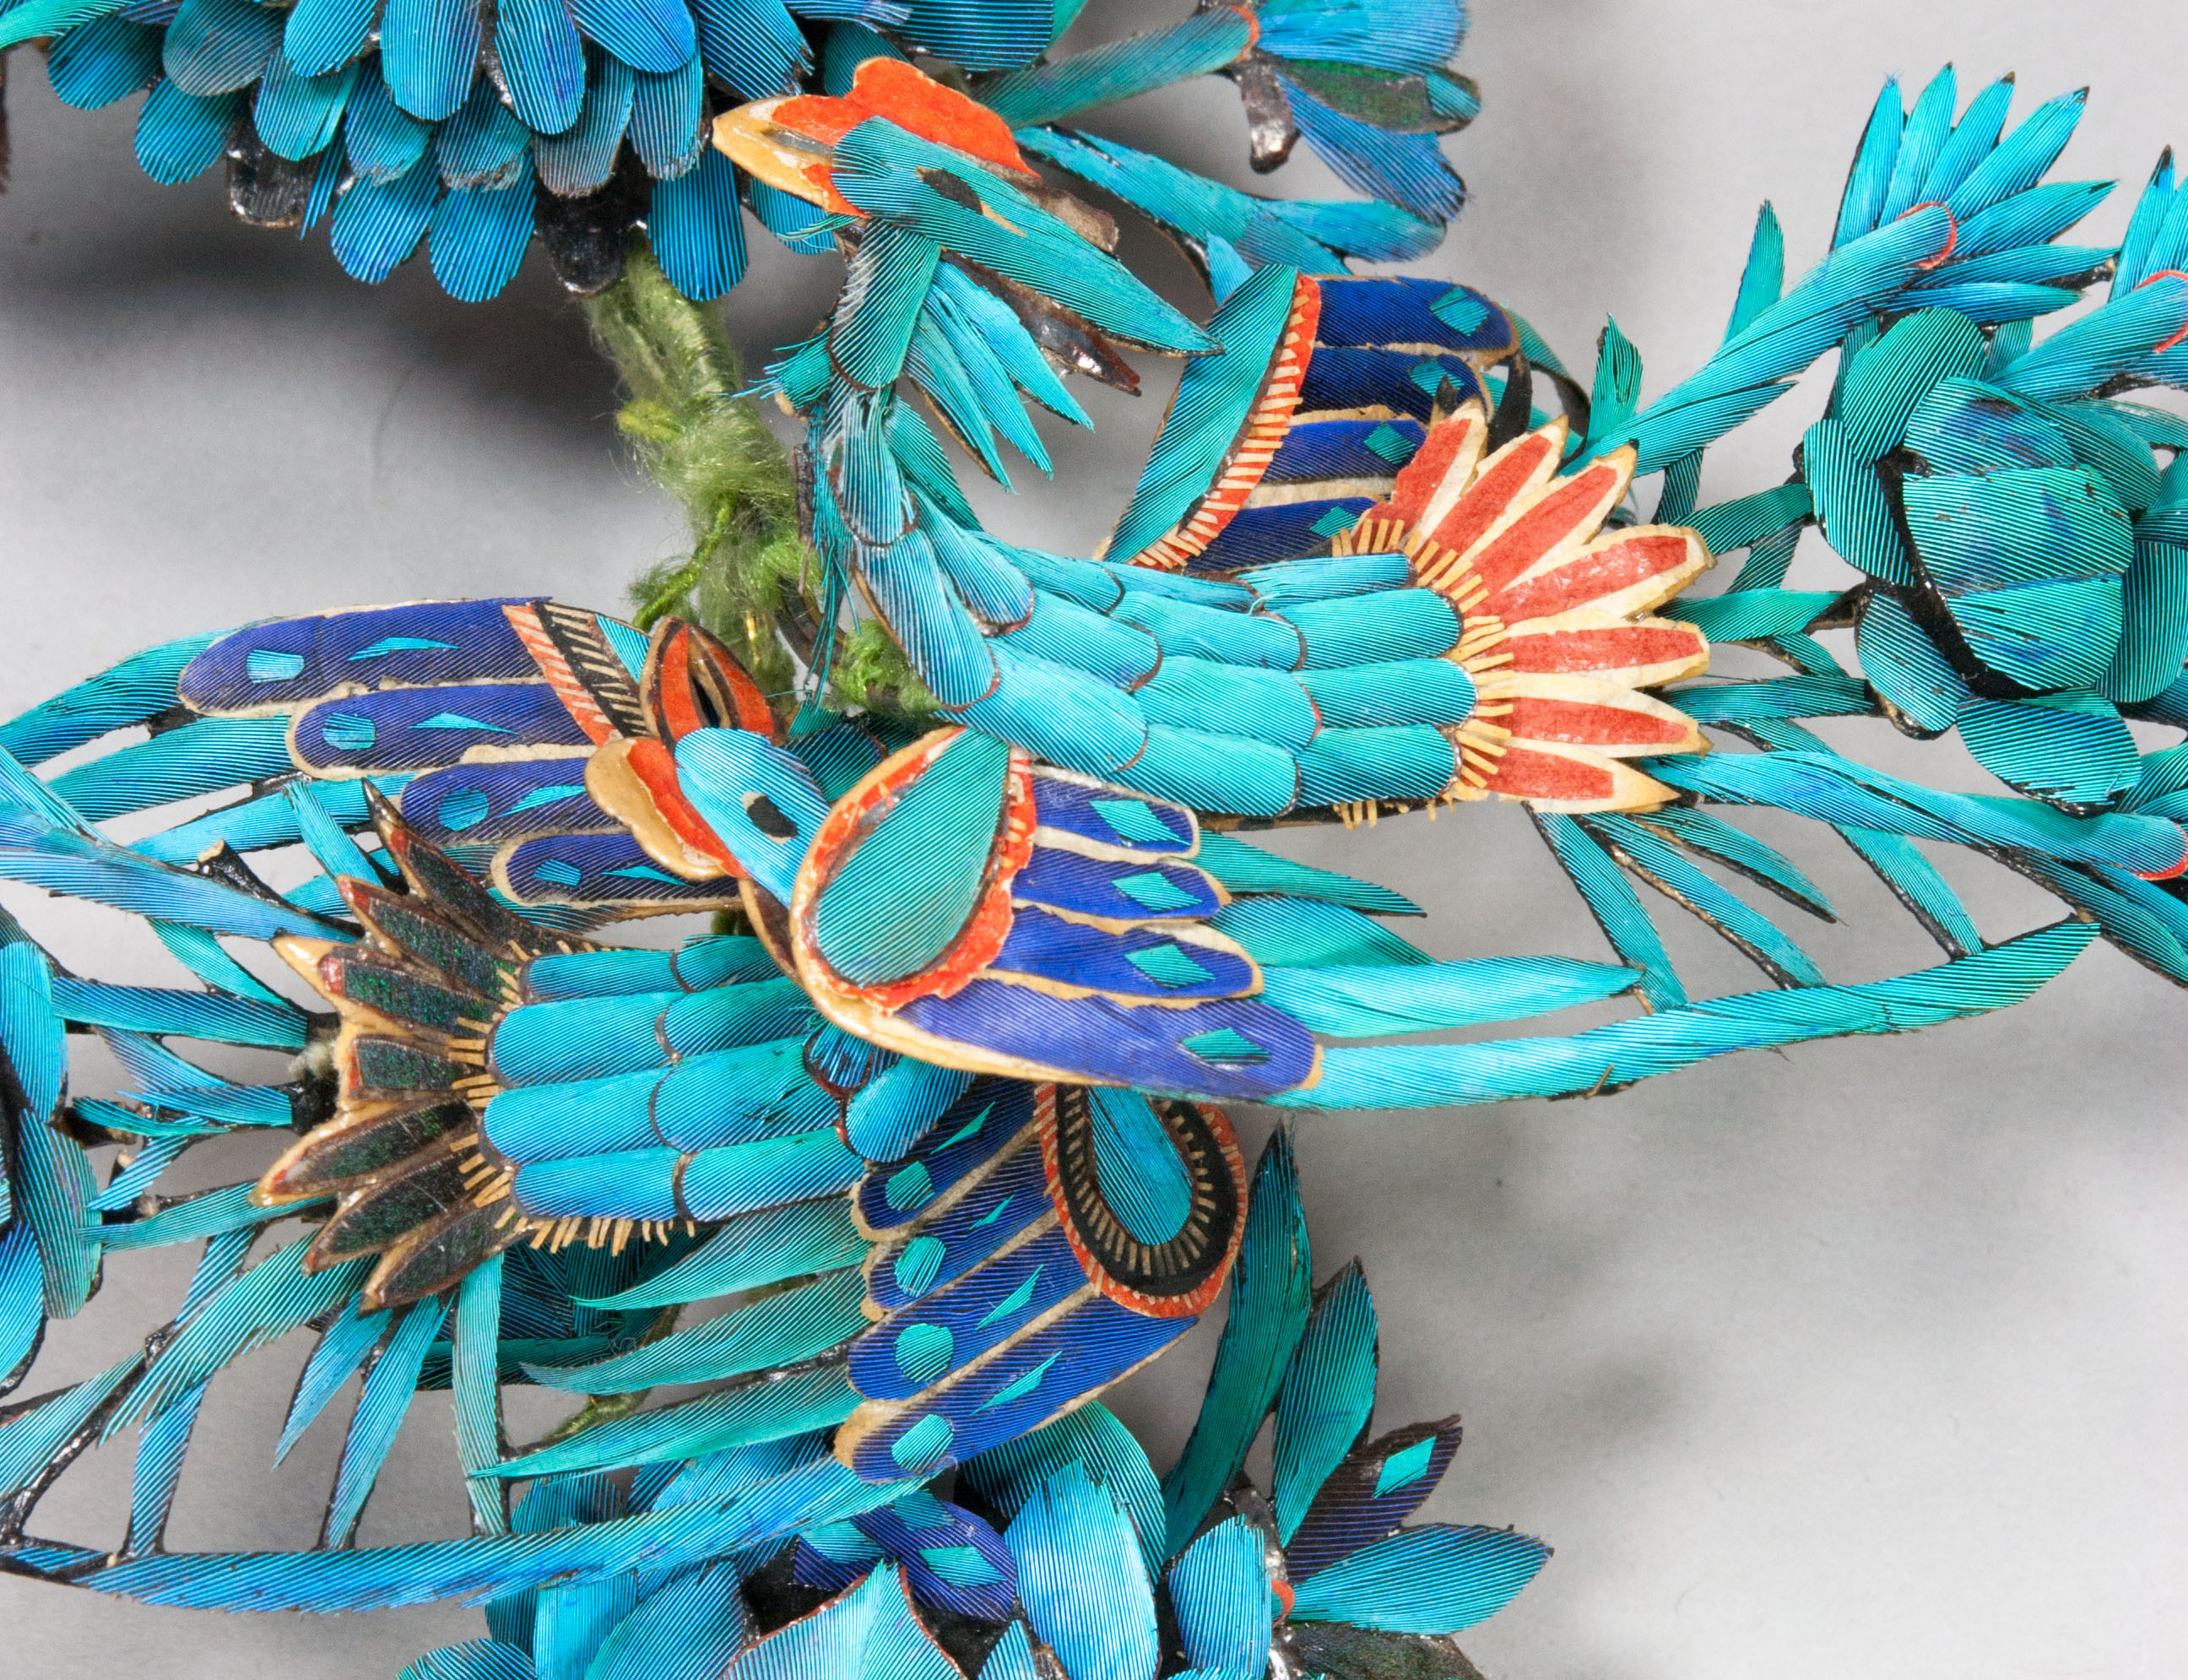 Detail of phoenixes, decorated with kingfisher feathers, red and gold paper. Supporting wires are seen wrapped in green silk.